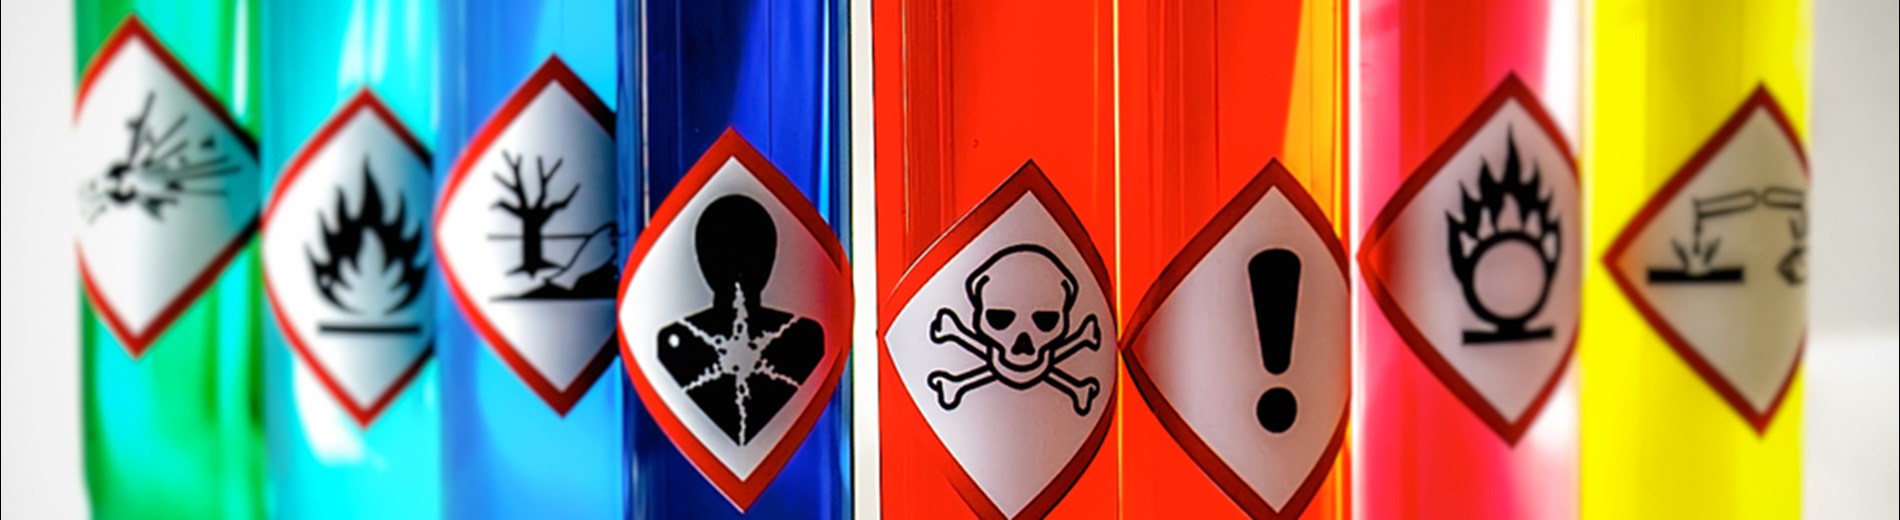 E Learning - Control of Substances Hazardous to Health (COSHH)